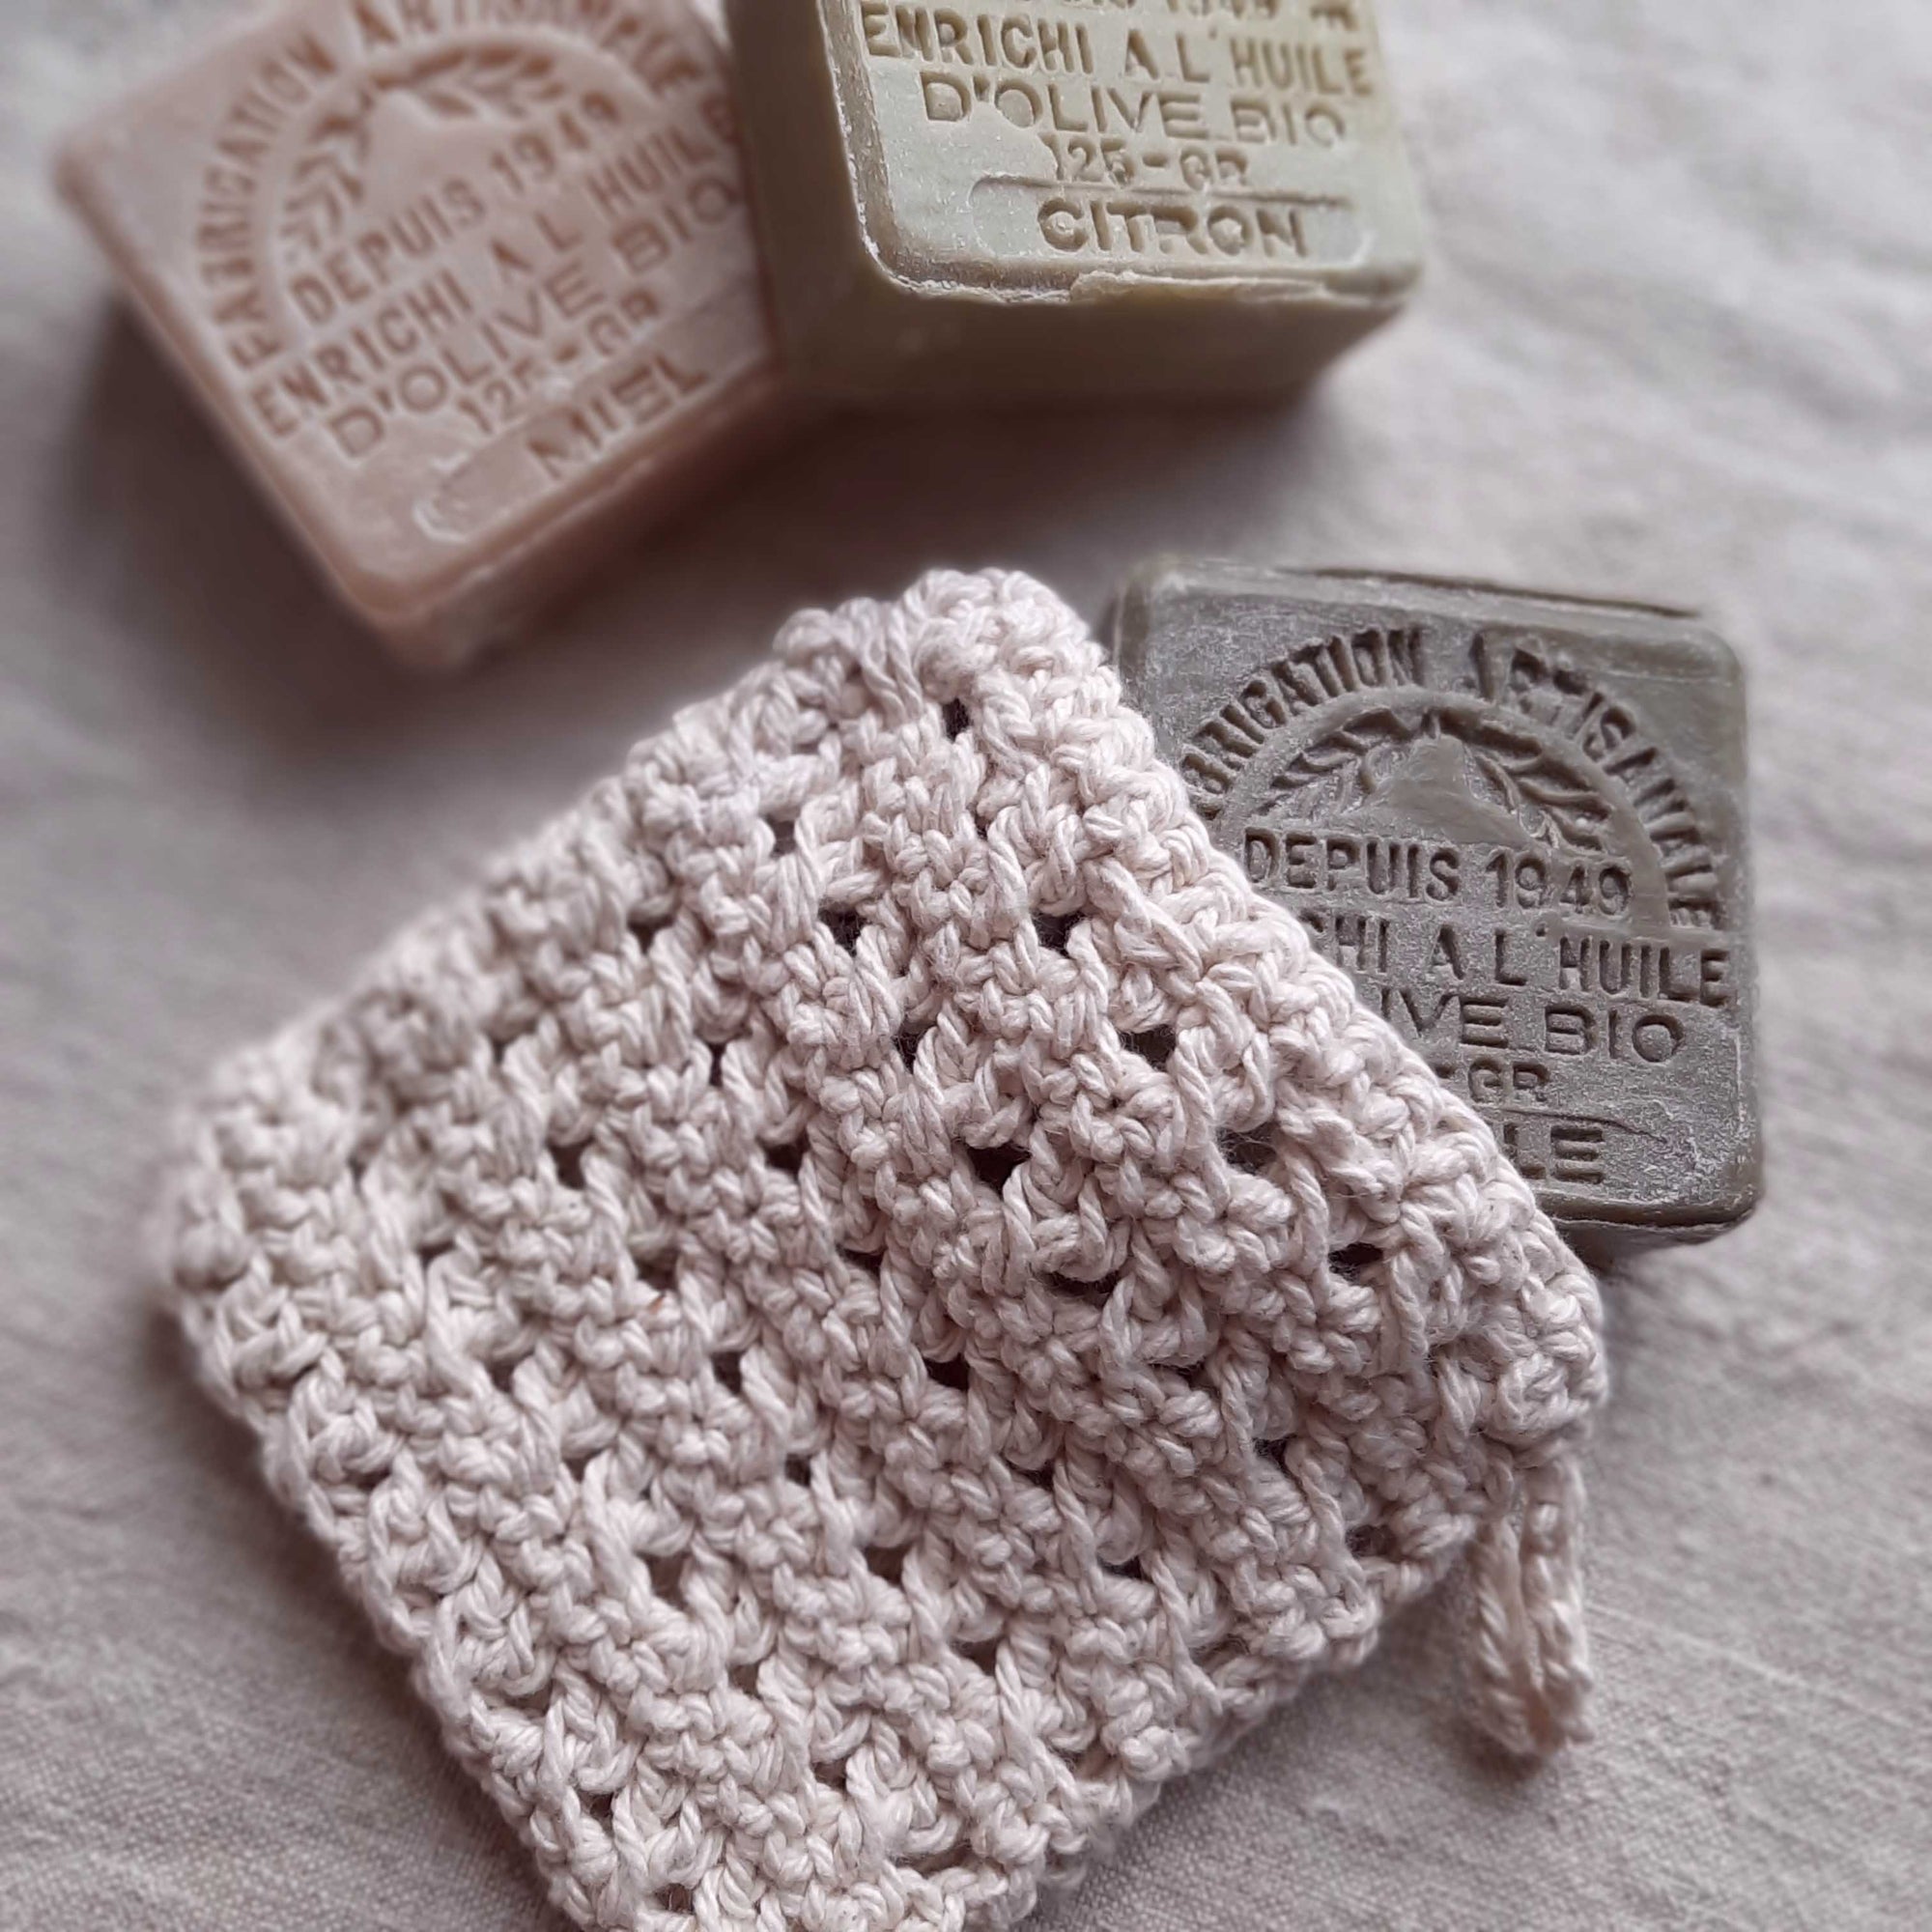 This super soft vintage style Hand-Knit Soap Sock adds a bit luxury to your bathing experience. Handmade of 100% Certified Organic Cotton, this knit soap bag fits a bar soap and creates a rich lather as you wash. Designed for scrubbing without damaging the skin. It promotes circulation and gentle exfoliation. Machine wash/dry. 5"L x 4.5"W x 0.25"H